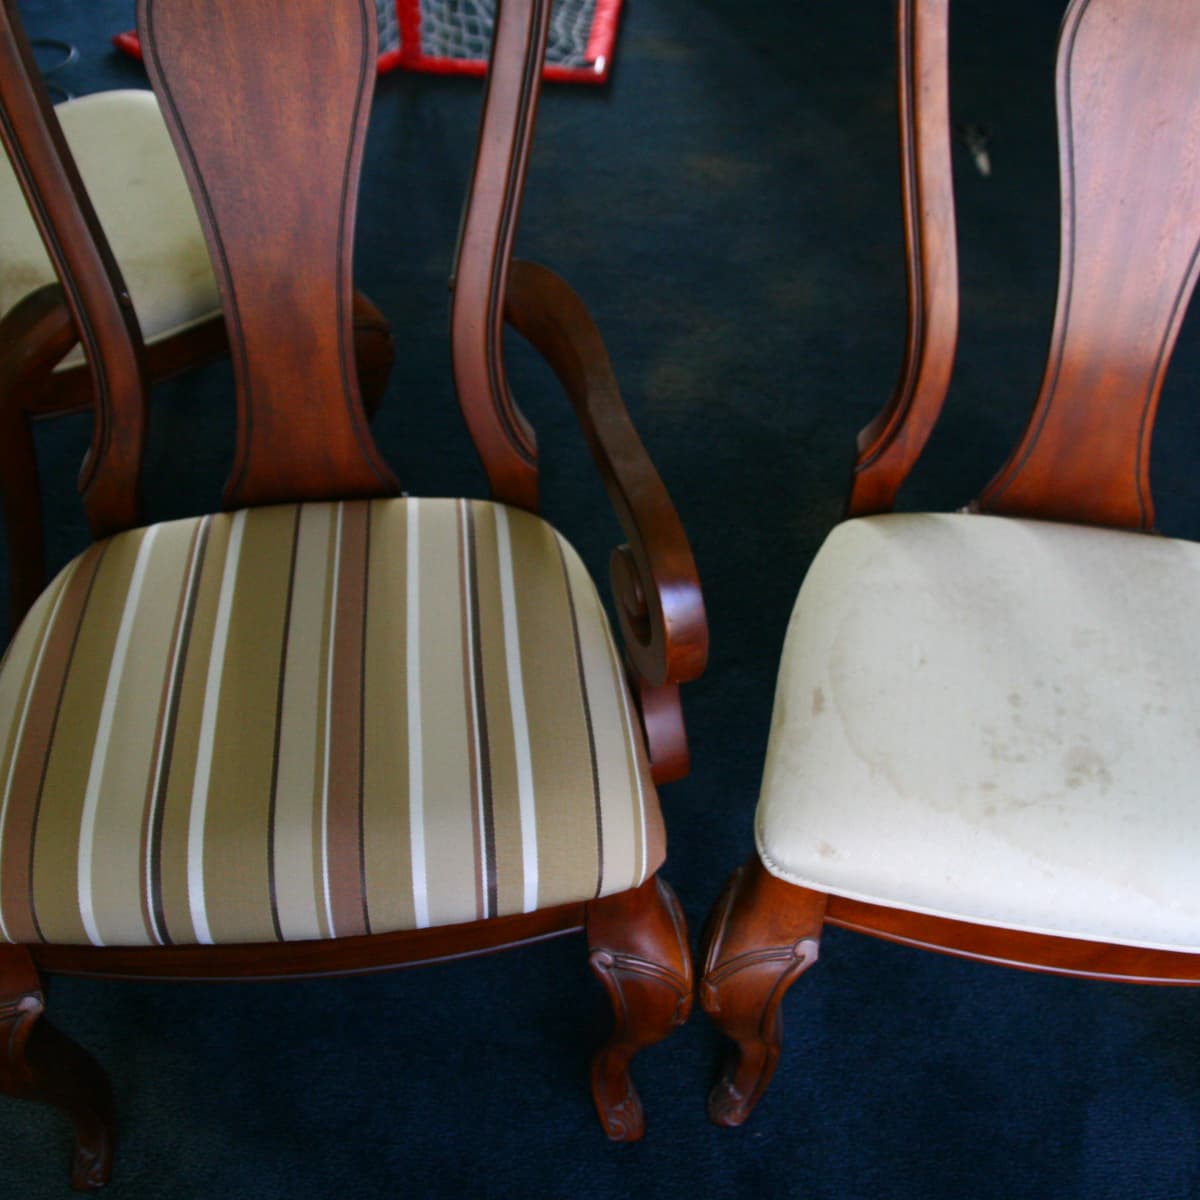 How To Reupholster A Dining Room Chair Dengarden Home And Garden